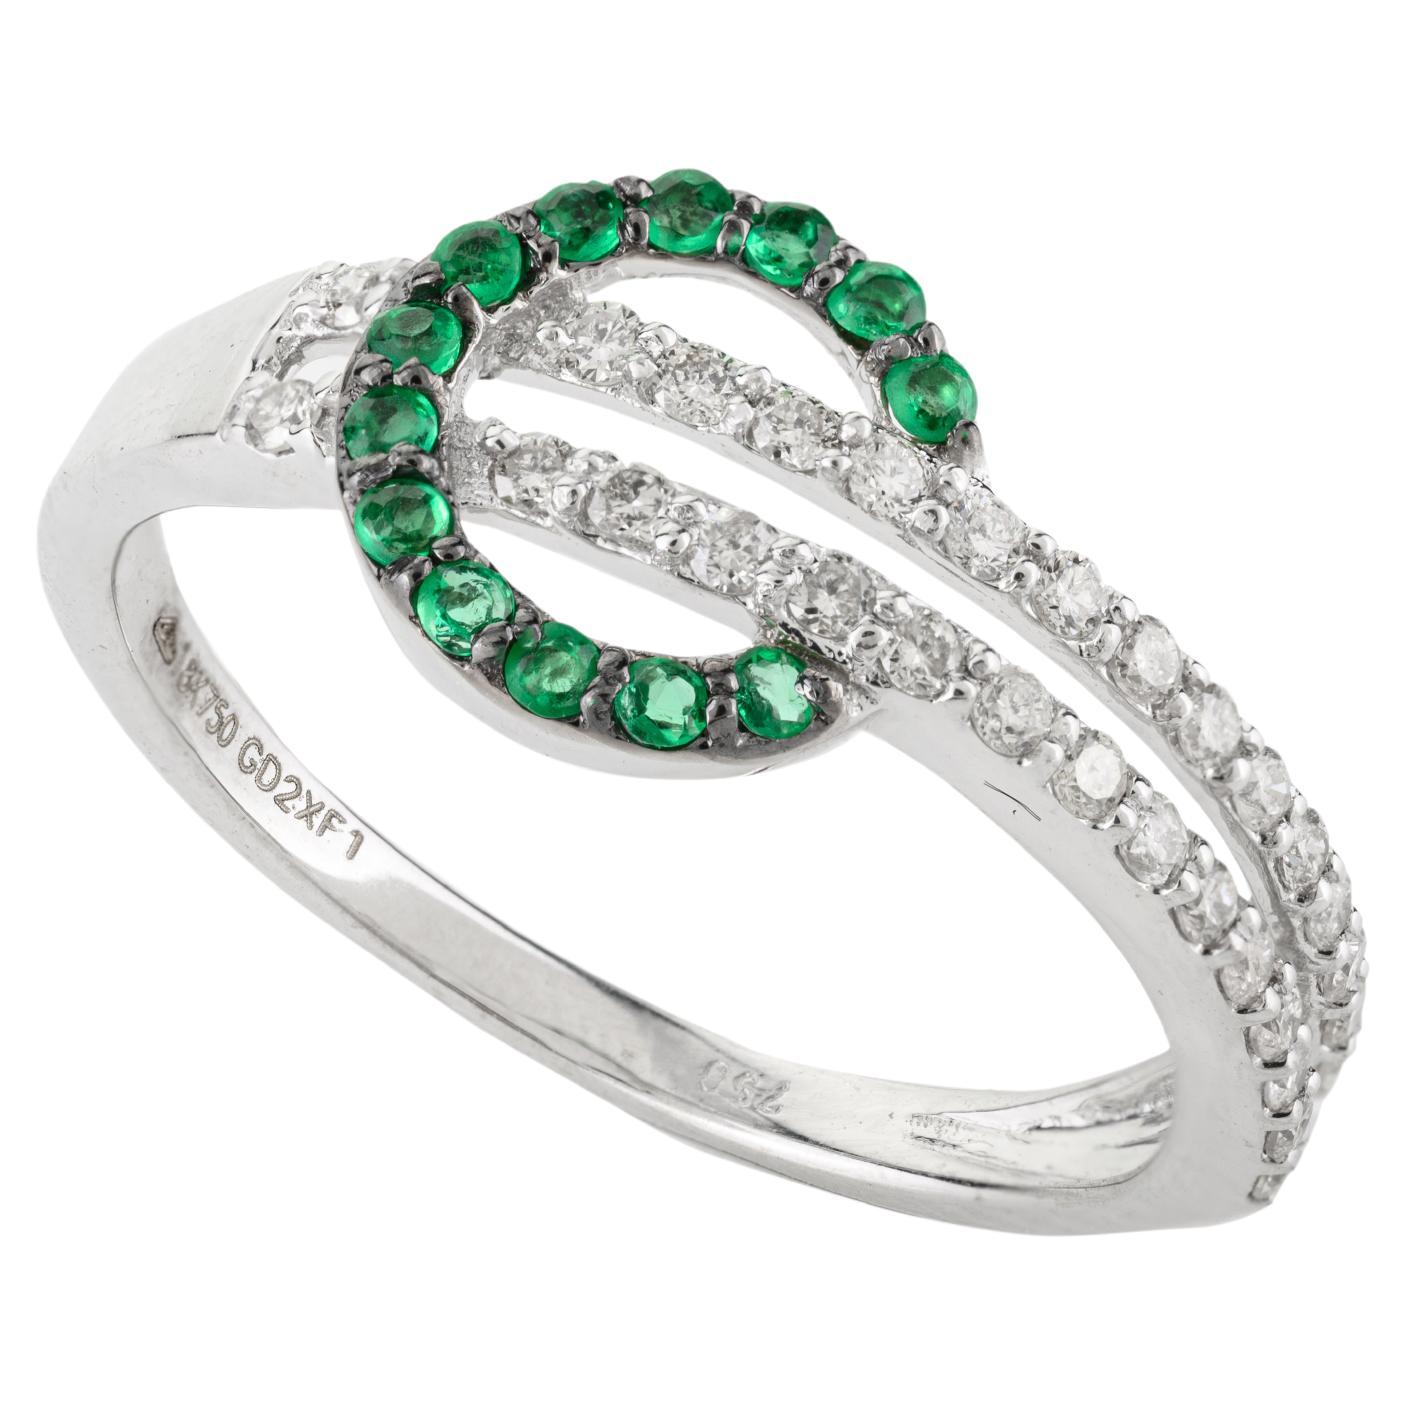 For Sale:  Unique Round Emerald Diamond Belt Buckle Ring in 18k Solid White Gold